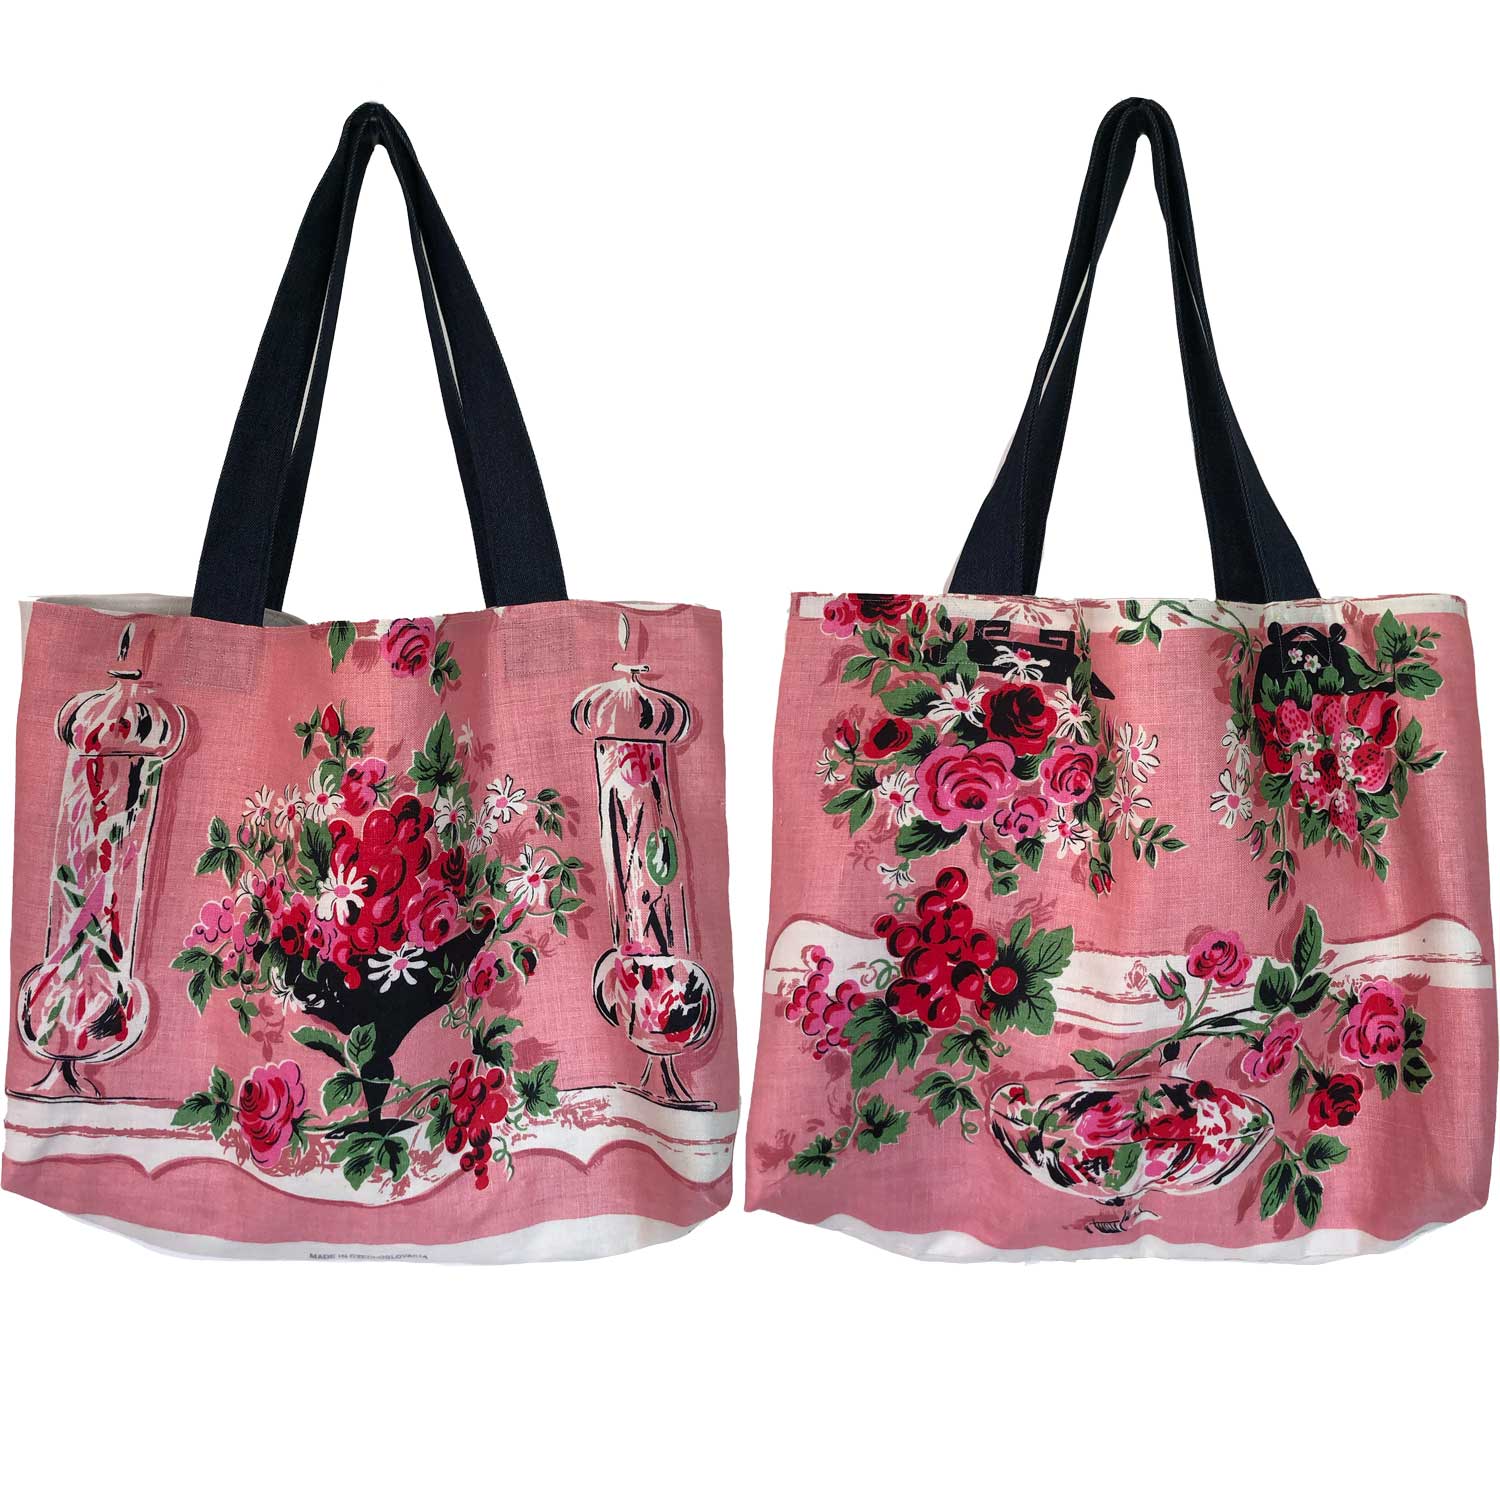 Pink vintage linen teatowel tote with pink roses and cherries image of shopping tote bag on white background